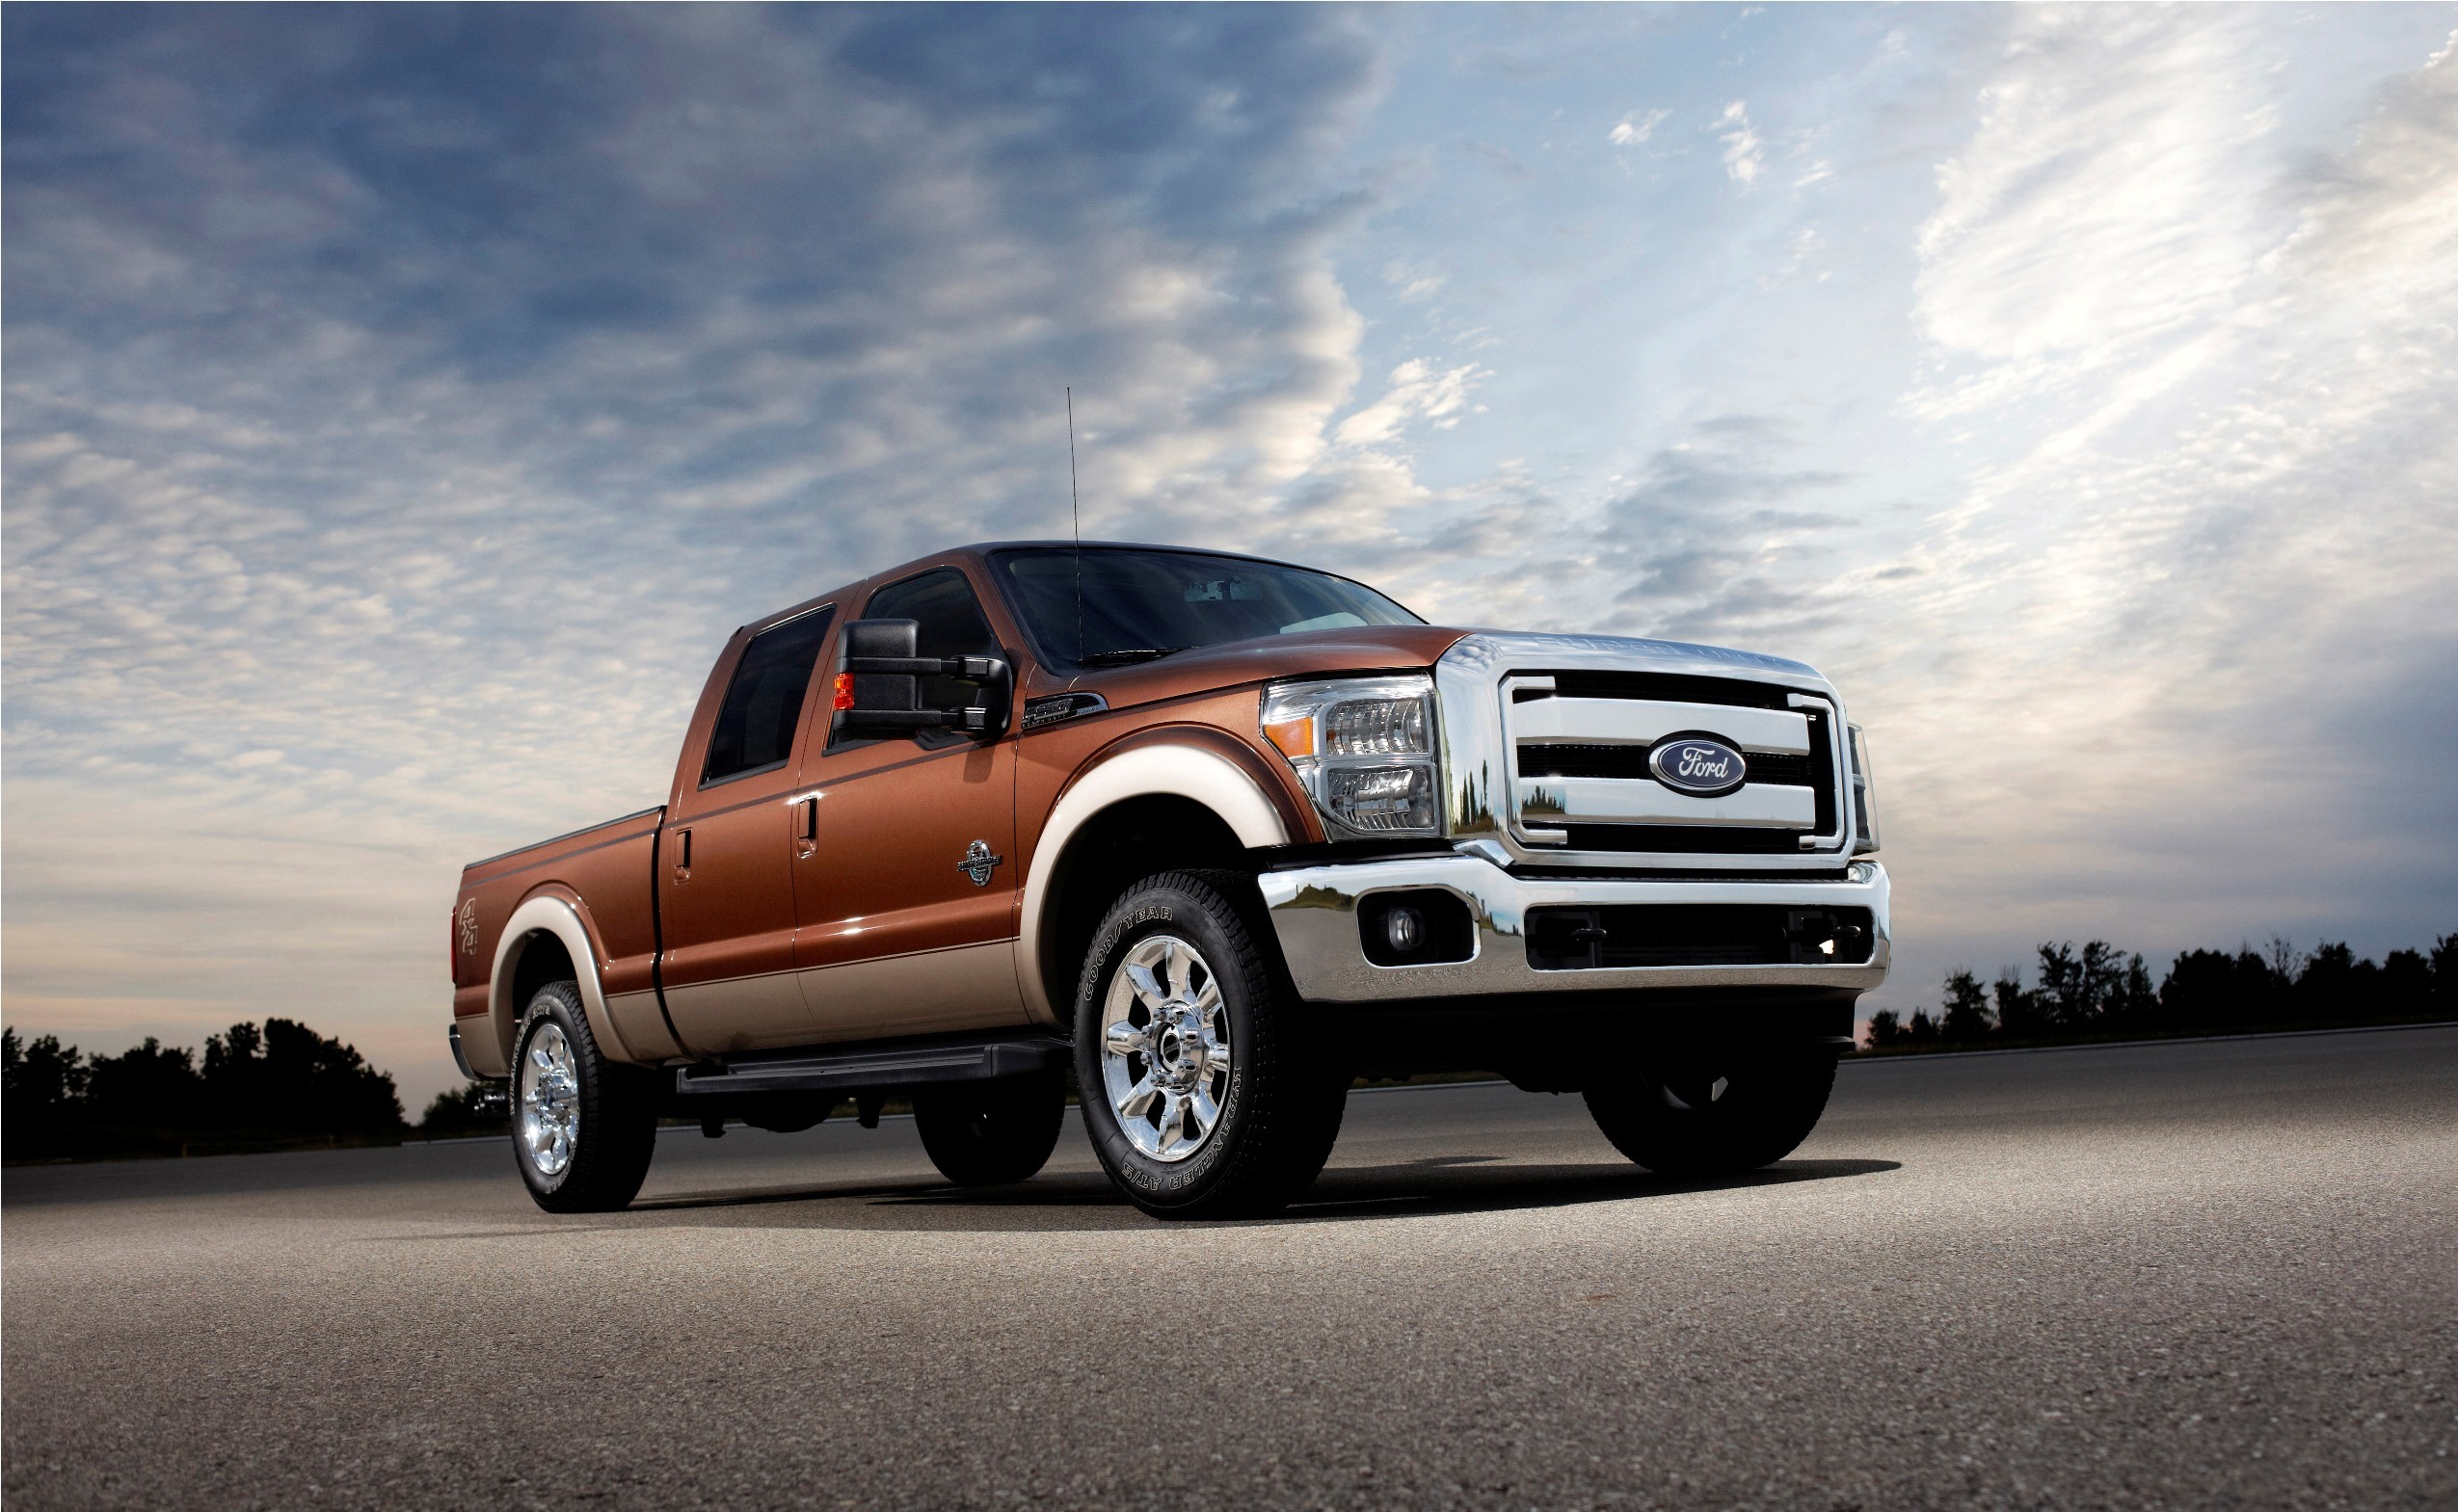 2550x1569 Ford super duty truck wallpapers.